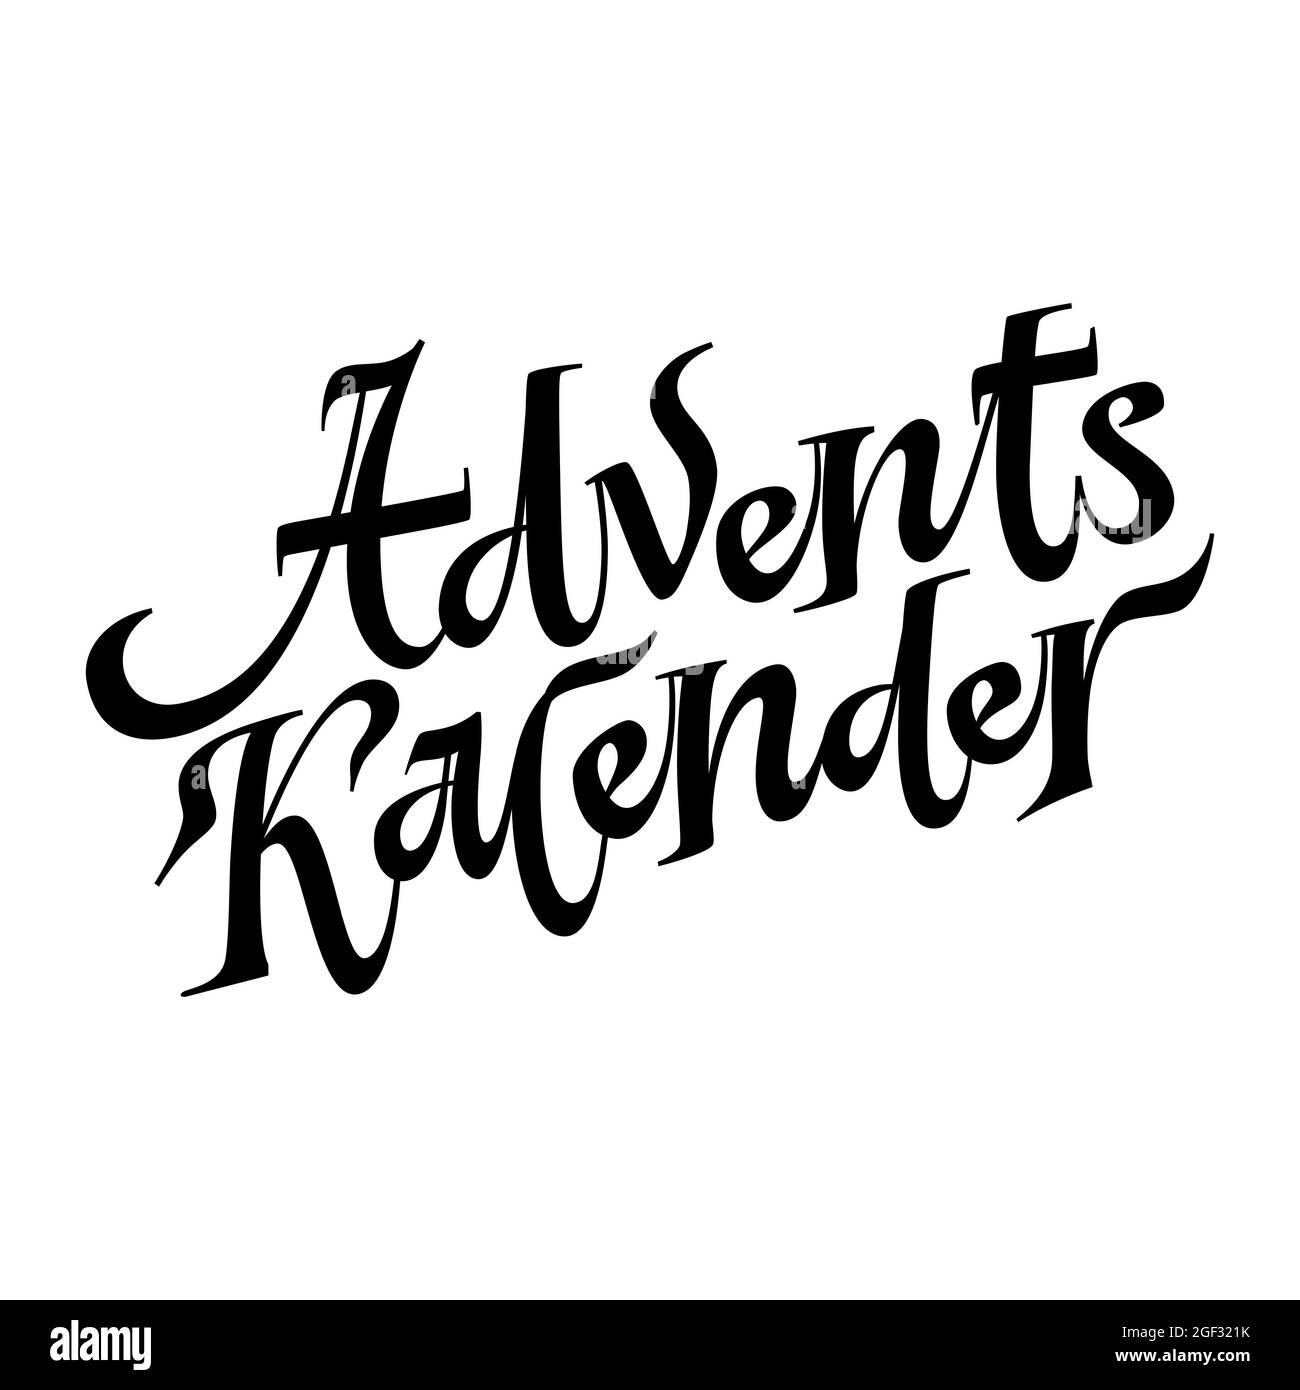 Advents Calendar German Lettering. Advent Calendar Hand-Written Phrase. Vector illustration isolated on white. Cute classic Christmas calligraphy Stock Vector